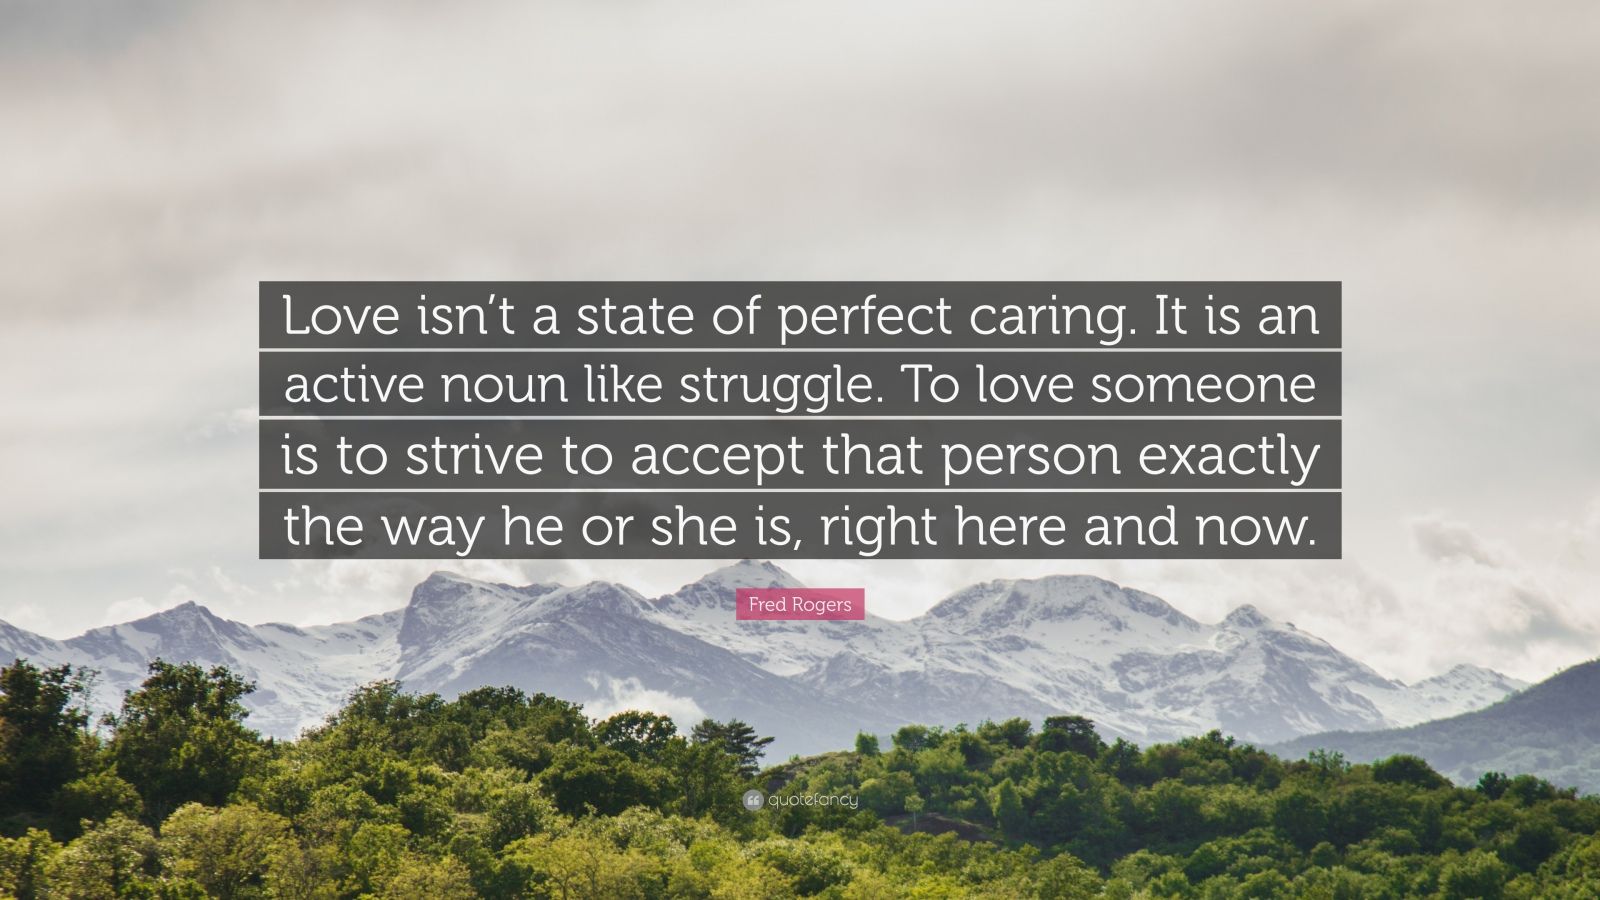 Fred Rogers Quote “Love isn t a state of perfect caring It